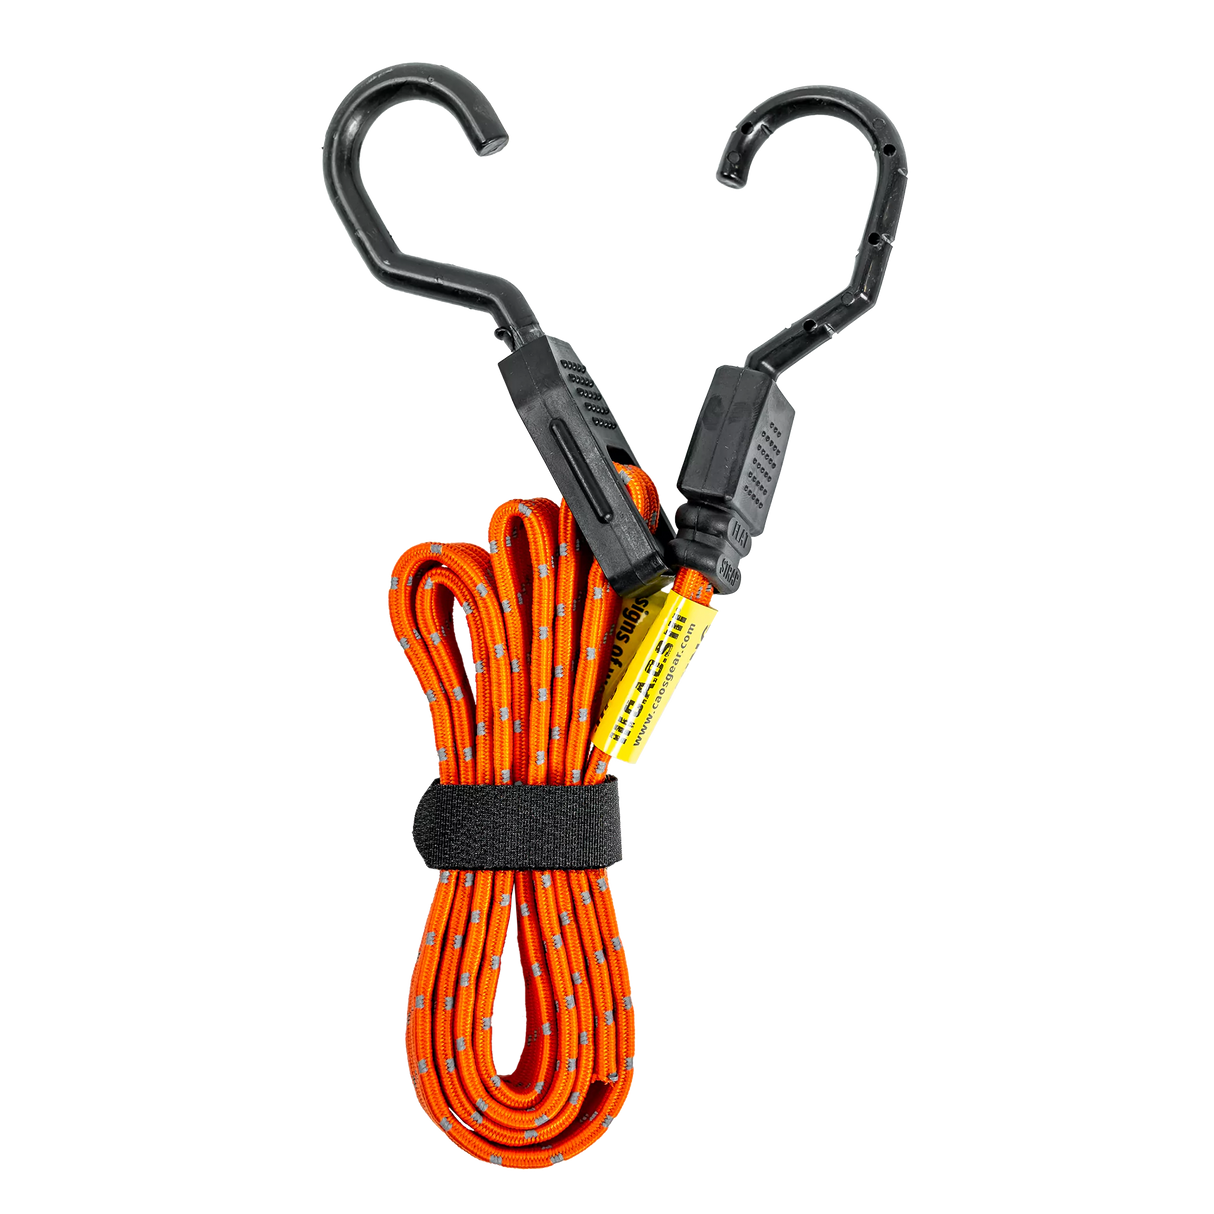 Secure Tite Adjustable Bungee Cord in the Bungee Cords department